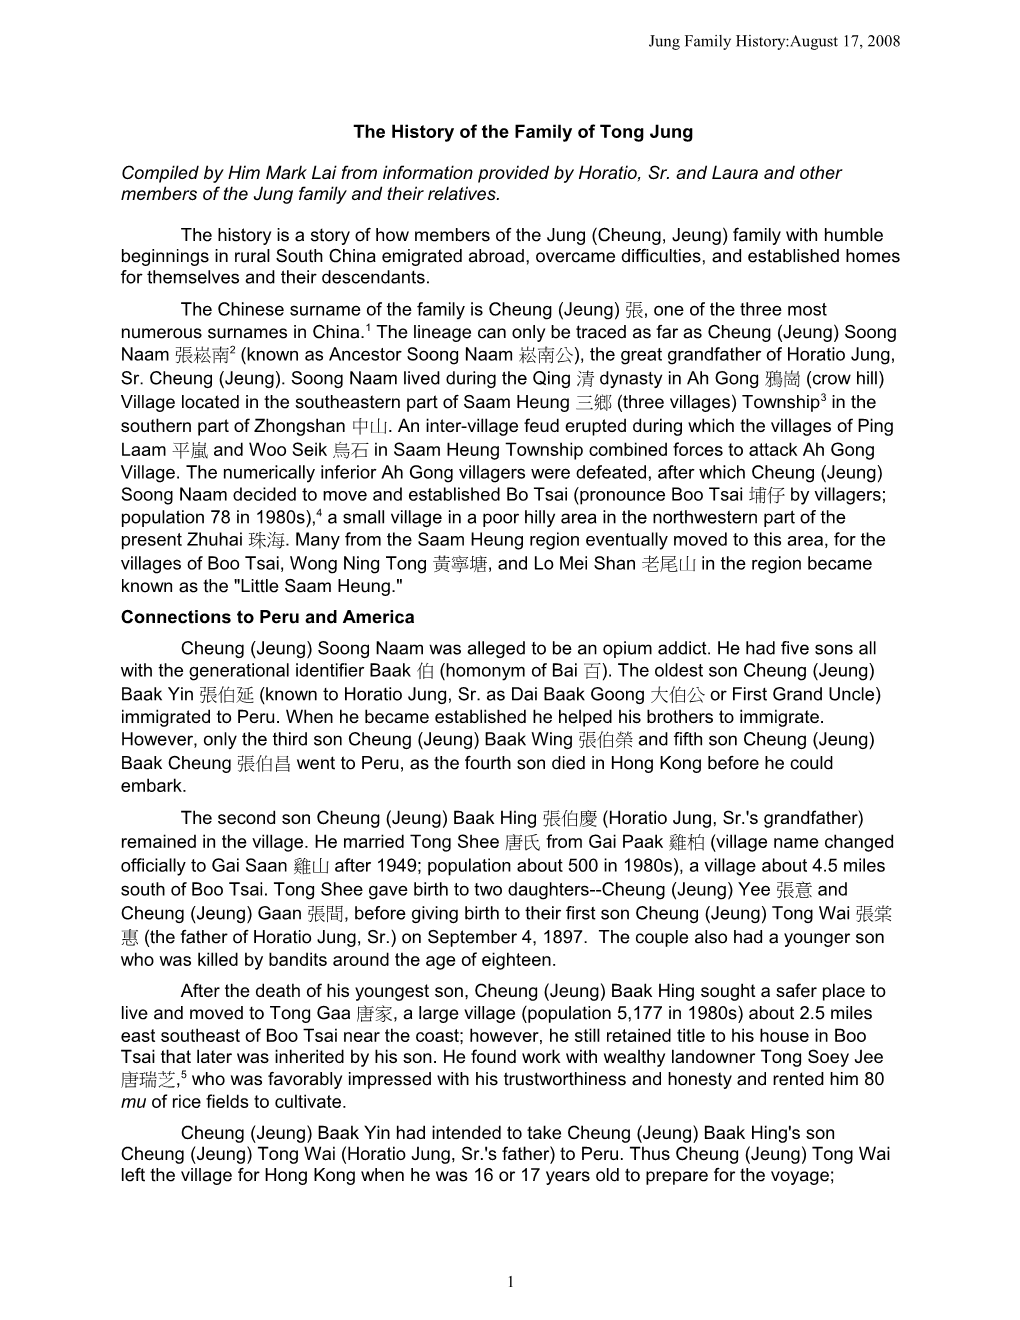 The Jung (Cheung, Jeung) Family History